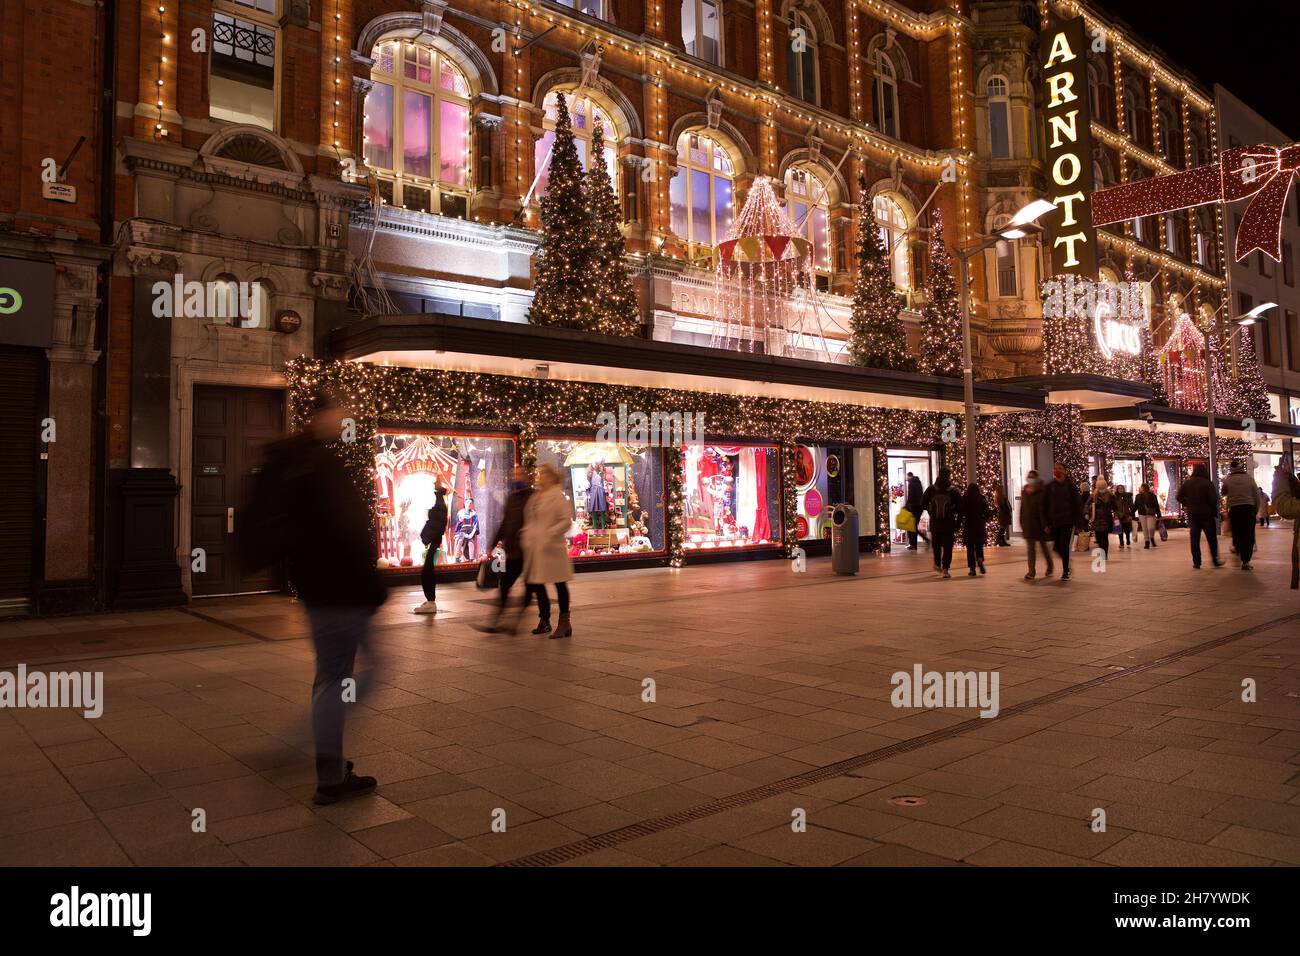 Dublin, Ireland - November 24, 2021: shoppers pass the Christmas lights and decorations at the landmark Arnotts Department Store on Henry Street, the Stock Photo